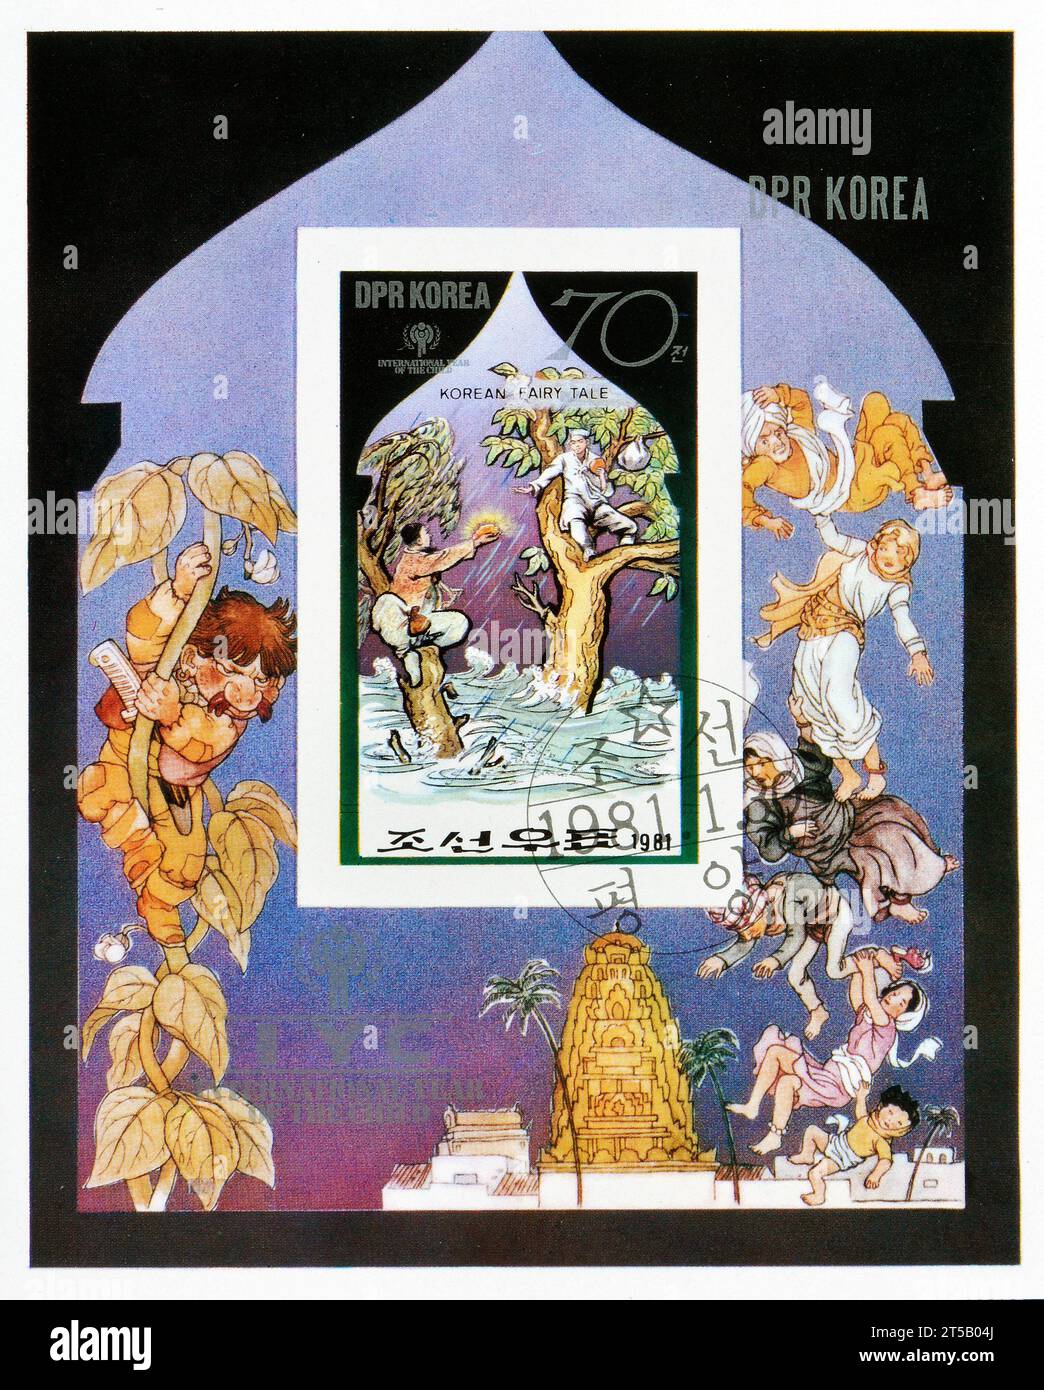 Souvenir Sheet with cancelled postage stamp printed by North Korea, that shows Korean fairy tale, circa 1981. Stock Photo